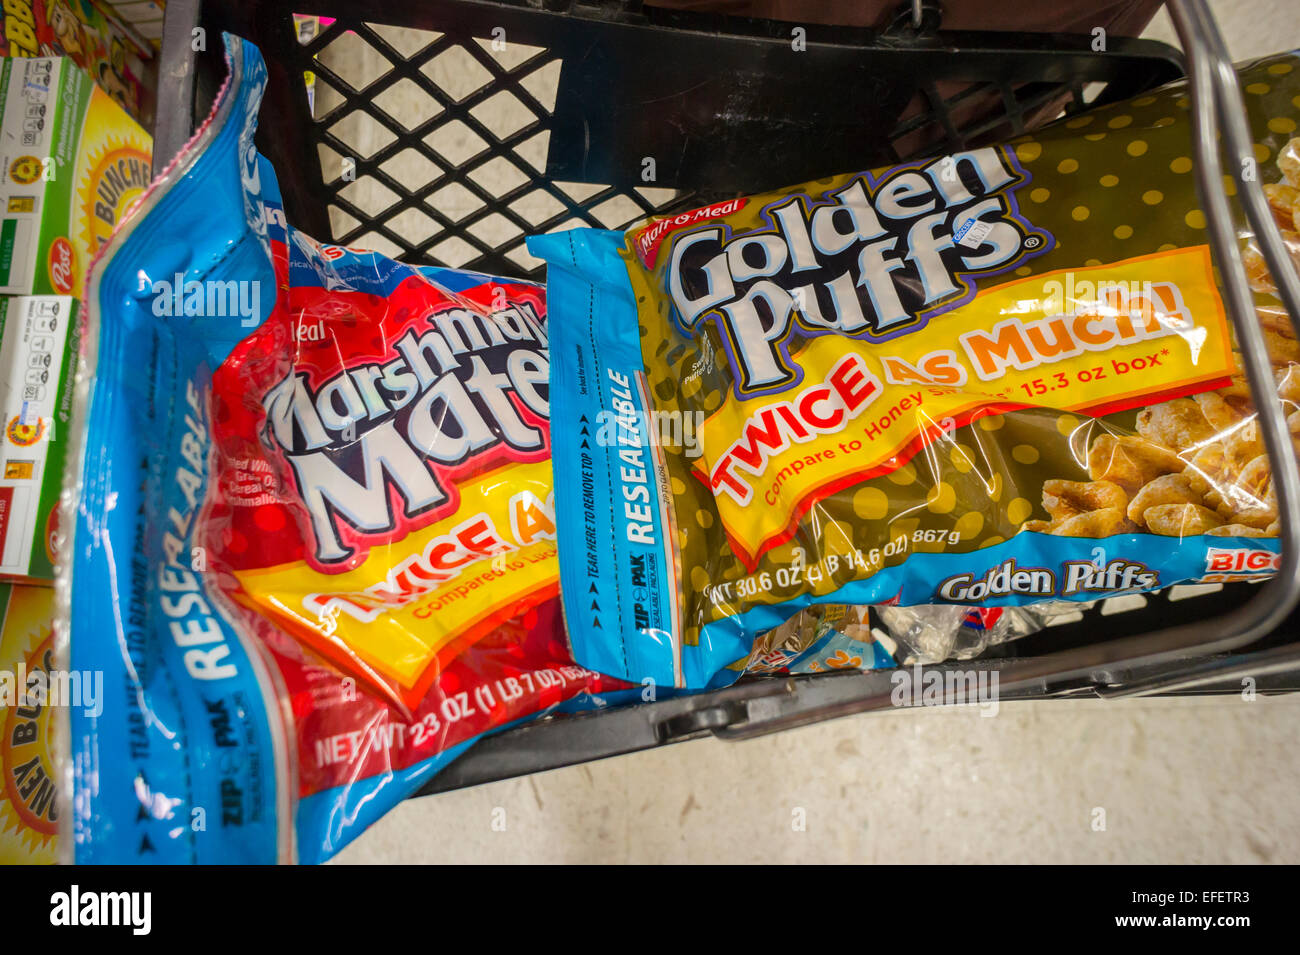 A shopper fills her basket with bags of MOM Brands (formerly Malt-O-Meal) sugary breakfast cereals in a supermarket in New York on Tuesday, January 27, 2015. Post Holdings whose brands include Grape Nuts and Raisin Bran is buying MOM Brands, manufacturer of iconic cereals such as Marshmallow Mateys and Golden Puffs in a deal worth $1.15 billion. The acquisition gives Post and 18 percent share of the breakfast cereal market after Kellogg's at 32% and General Mills at 31%. (© Richard B. Levine) Stock Photo